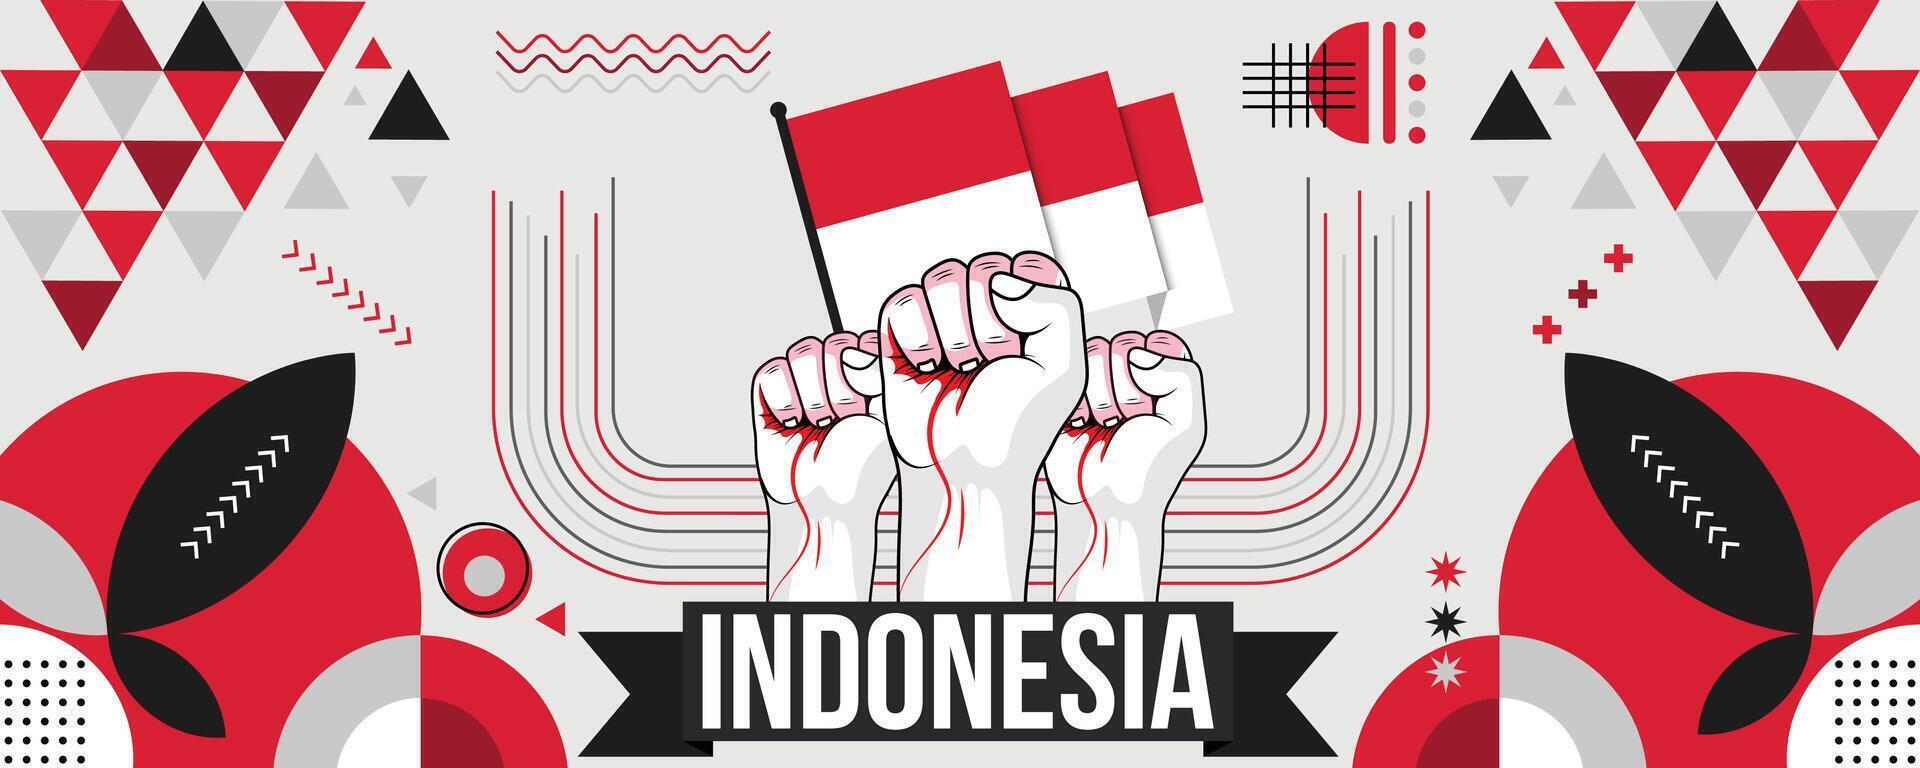 Indonesia national or independence day banner design for country celebration. Flag of Indonesia modern retro design abstract geometric icons. Vector illustration